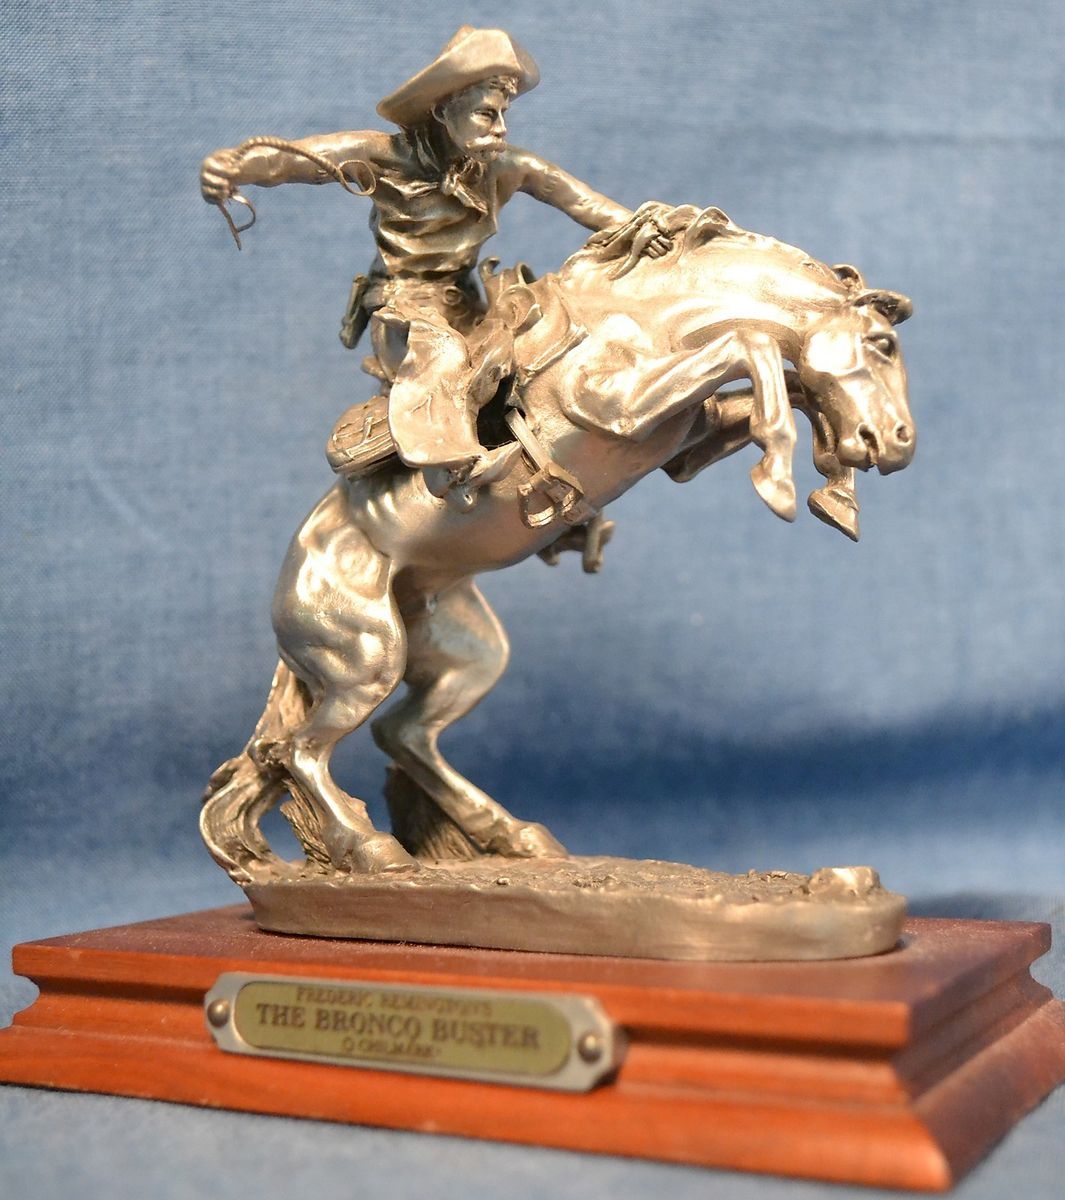  Western Art Figurine Frederic Remingtons The Bronco Buster